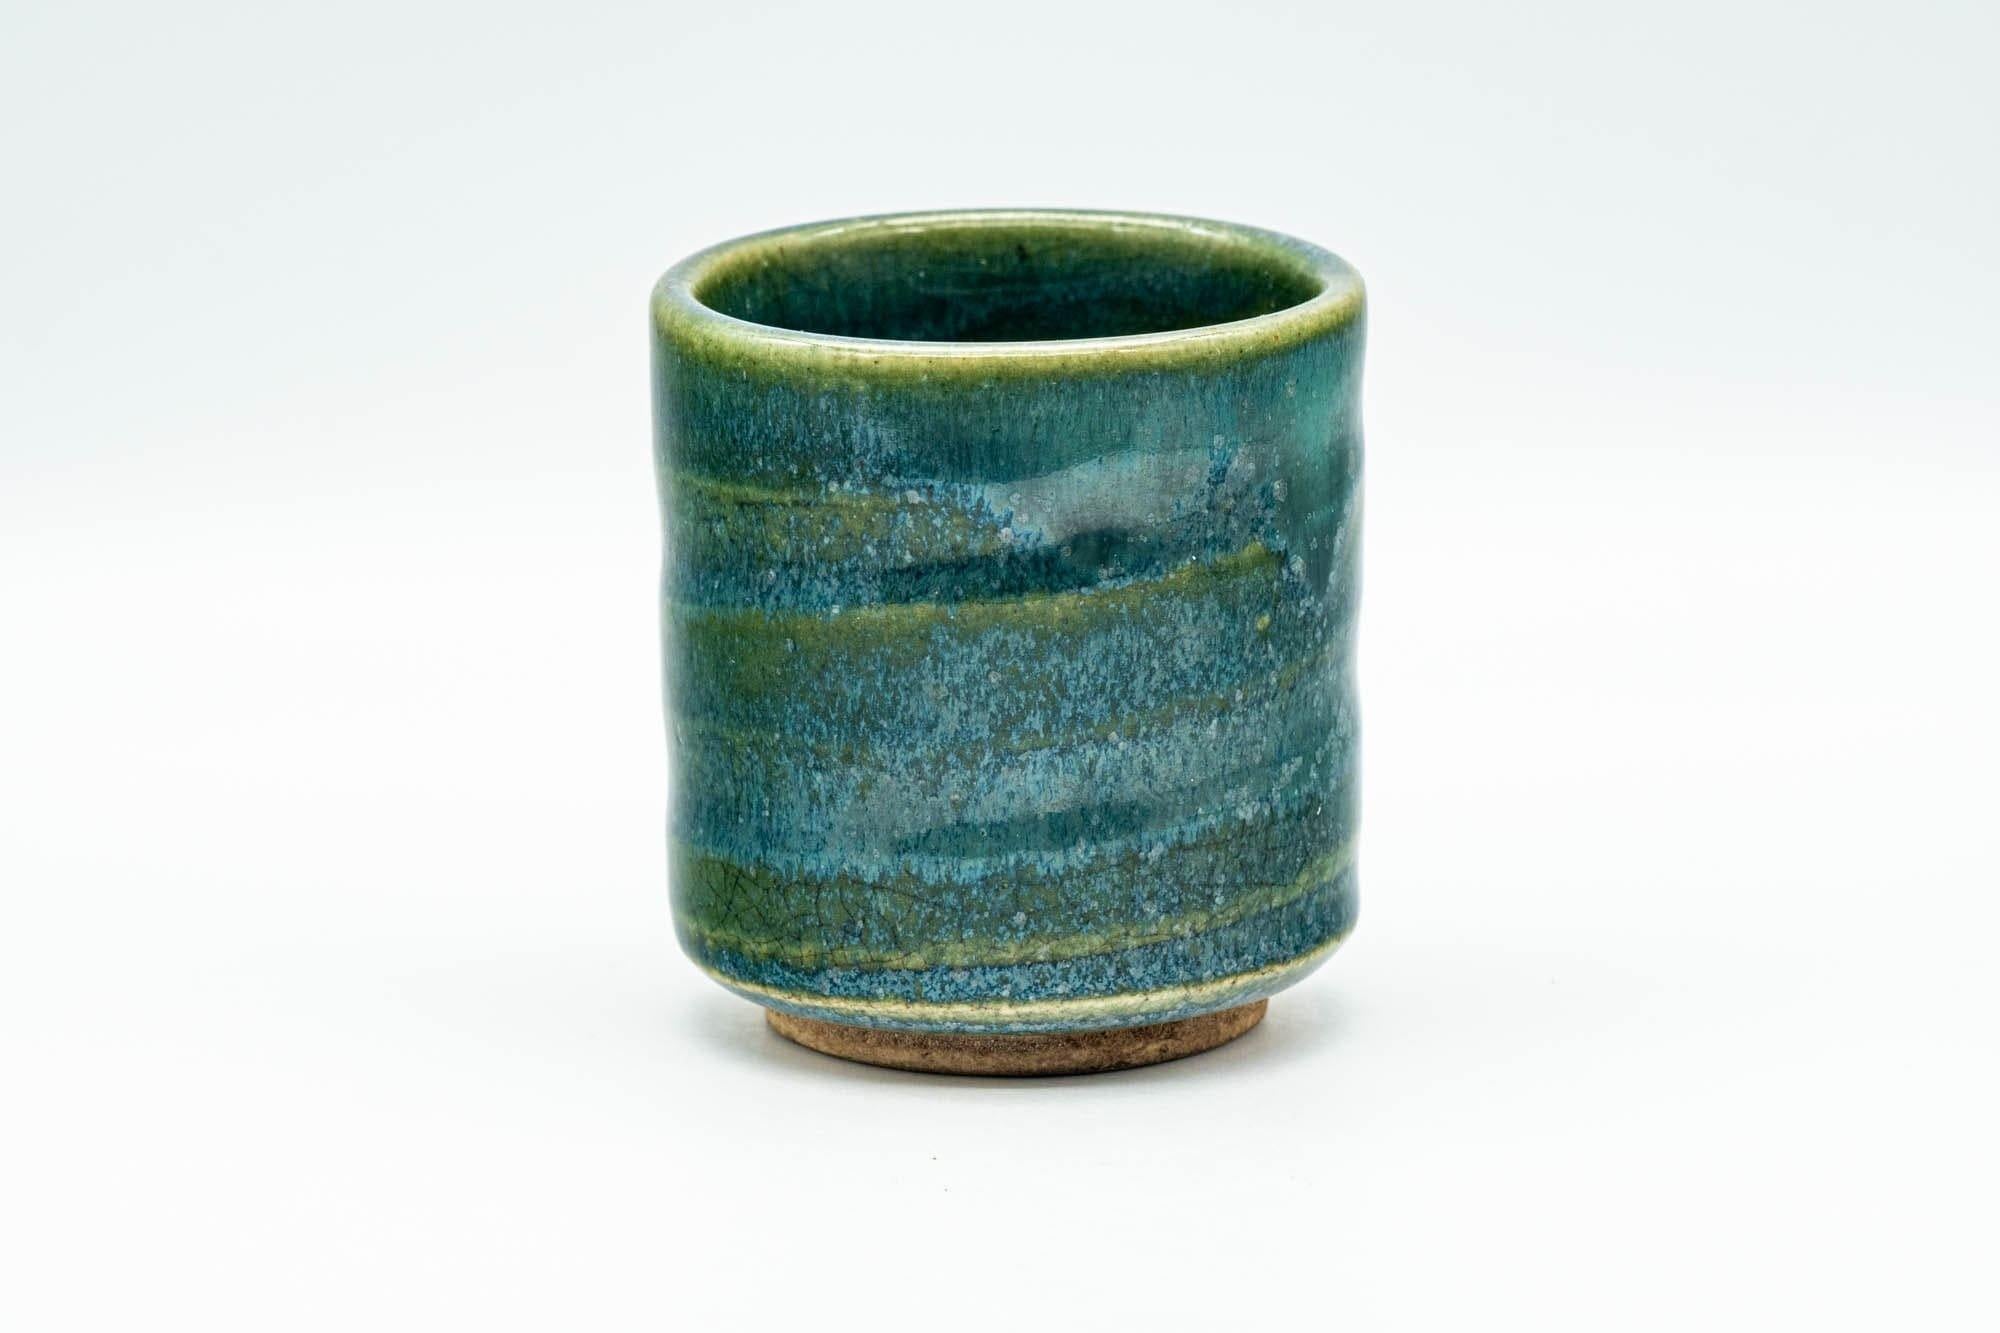 Japanese Teacup - Speckled Turquoise Green Glazed Yunomi - 140ml - Tezumi